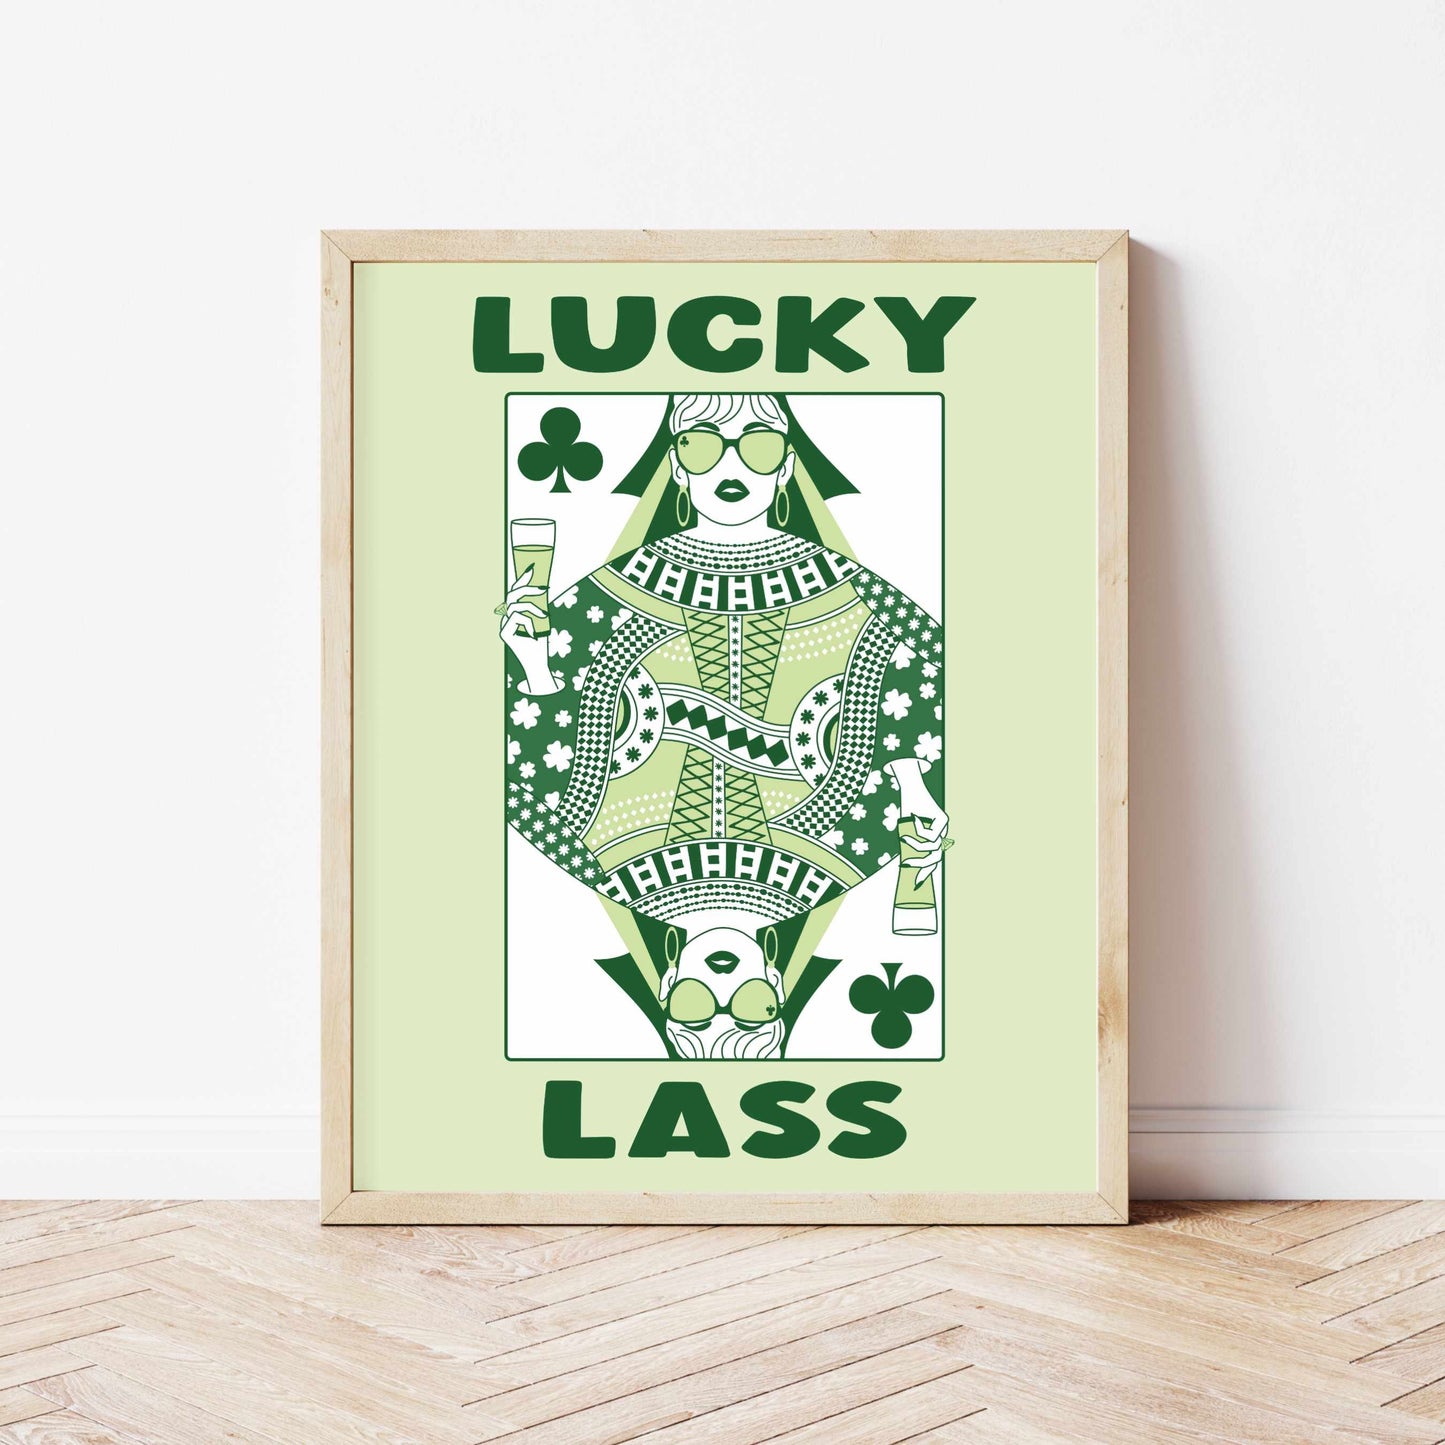 Printed St Patrick's Day Decor Poster, Queen of Clubs Lucky Lass